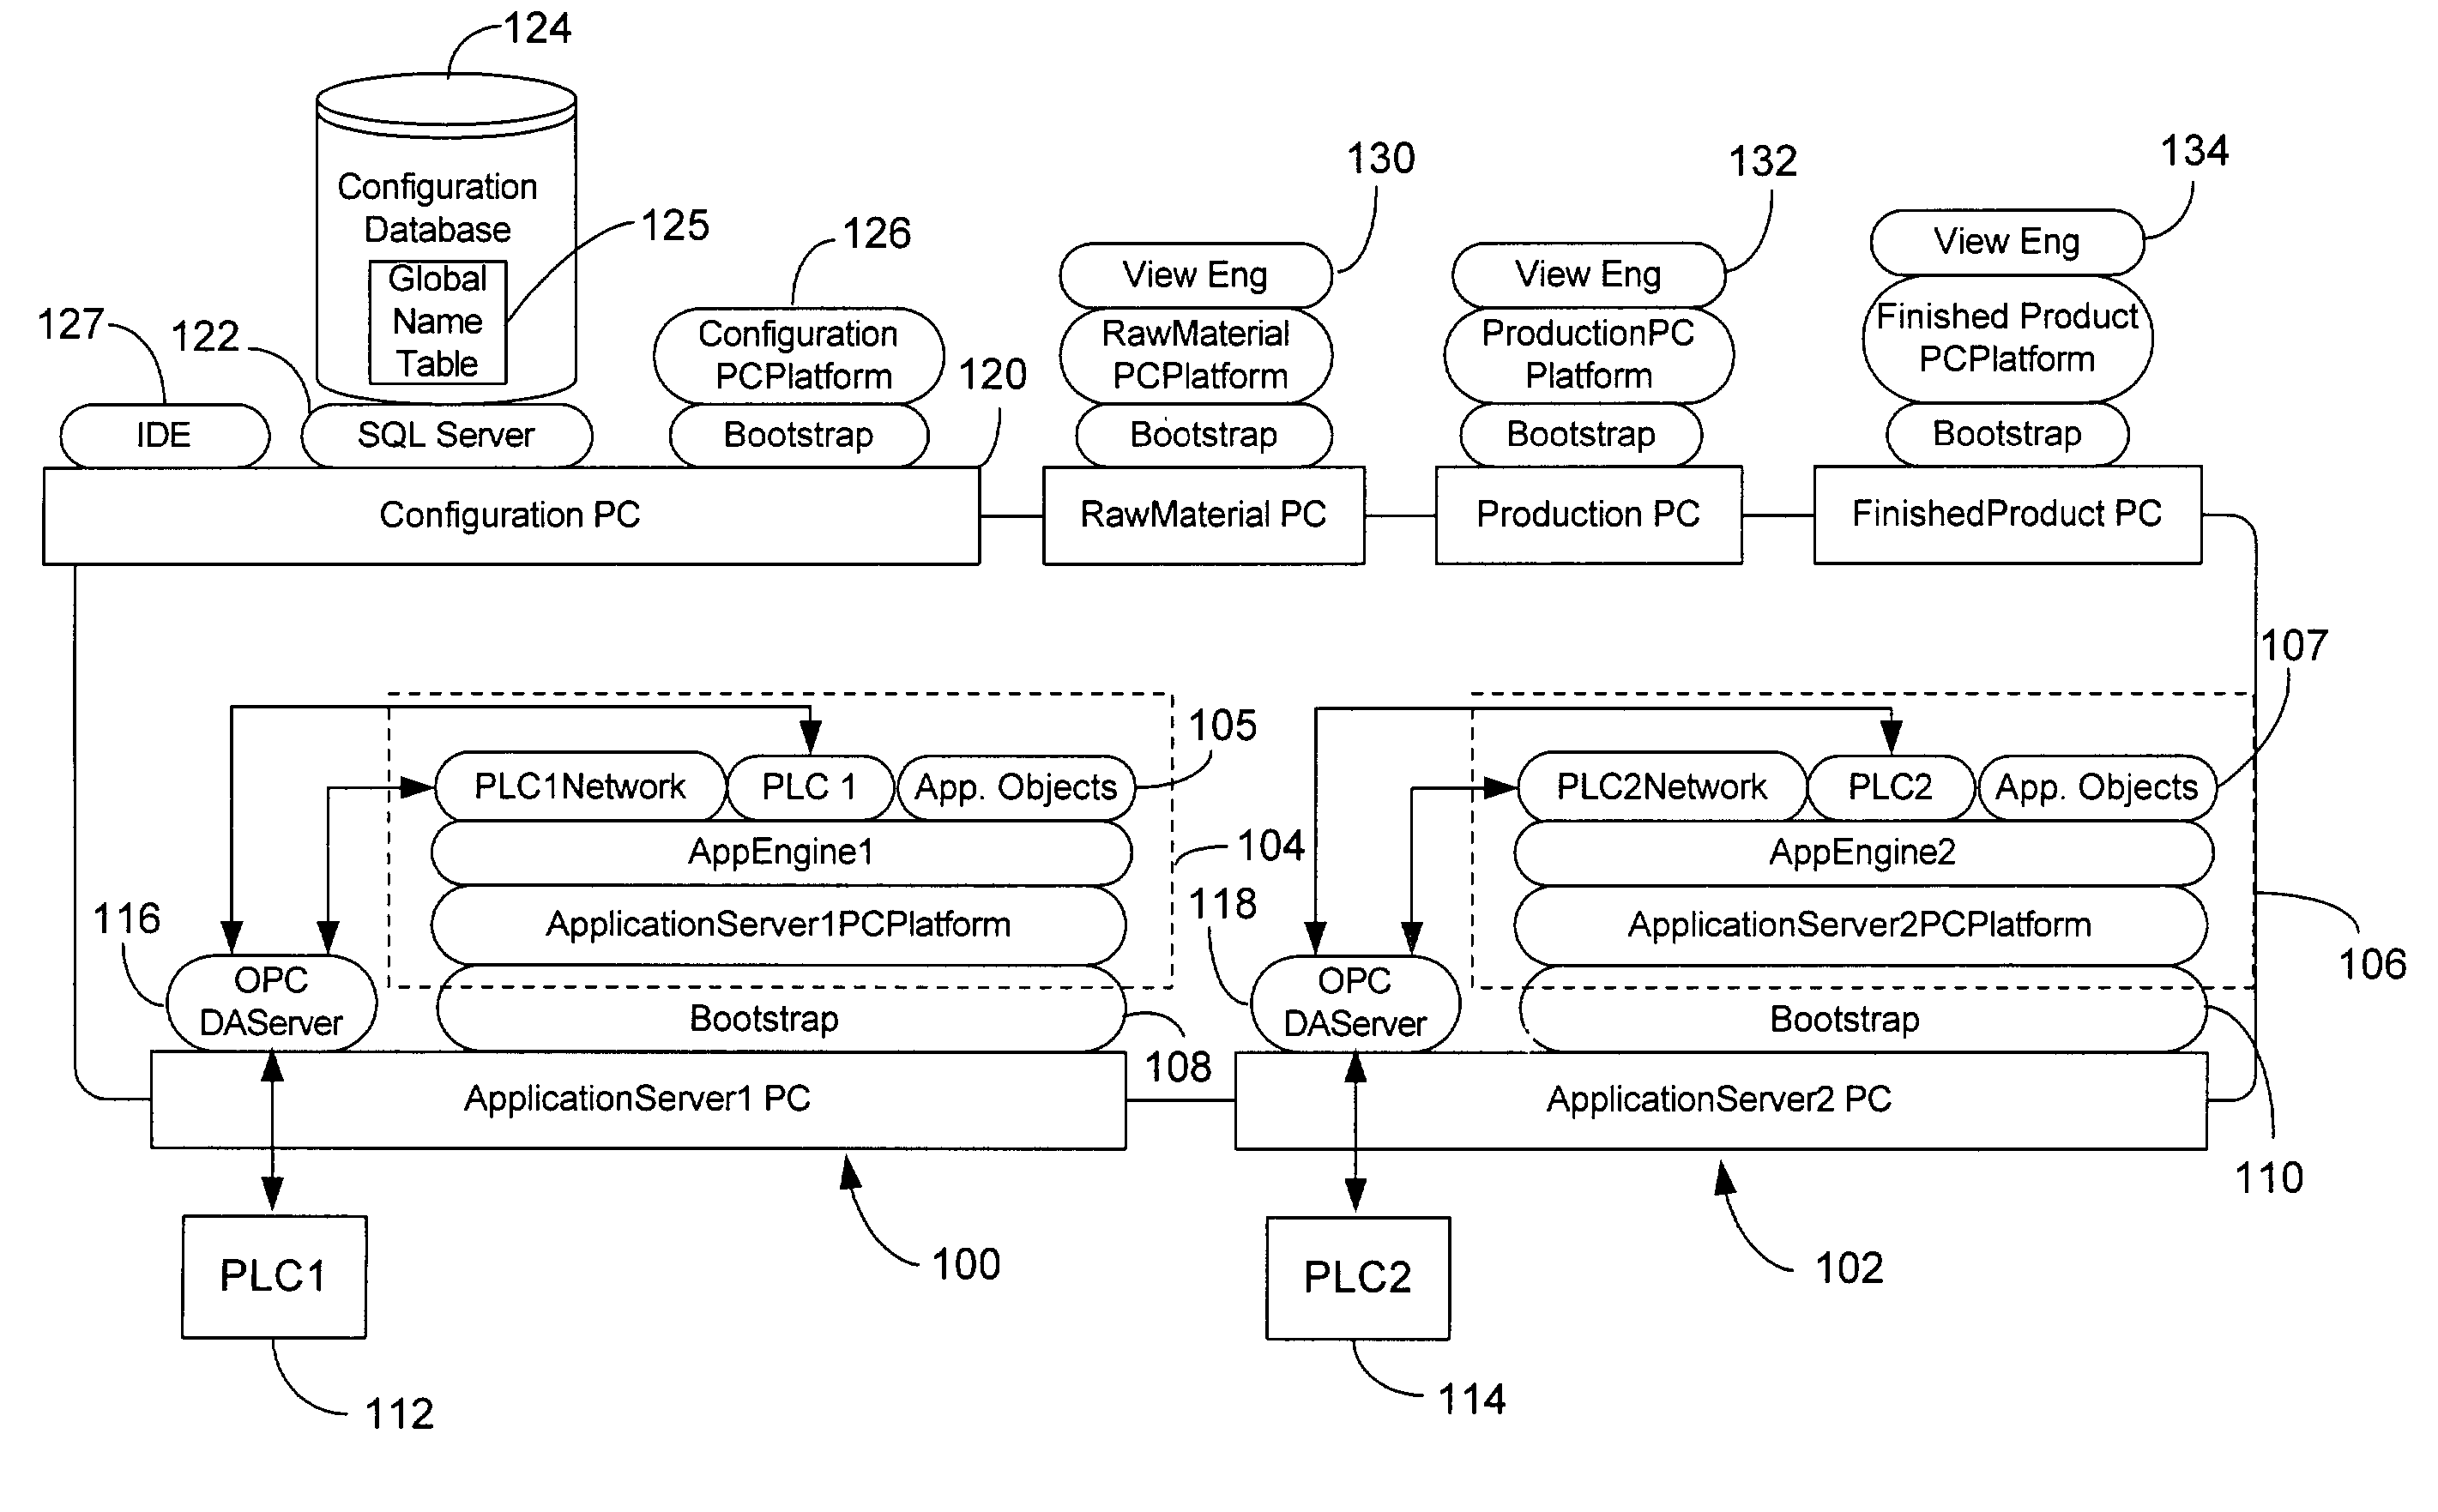 Supervisory process control and manufacturing information system application having an extensible component model